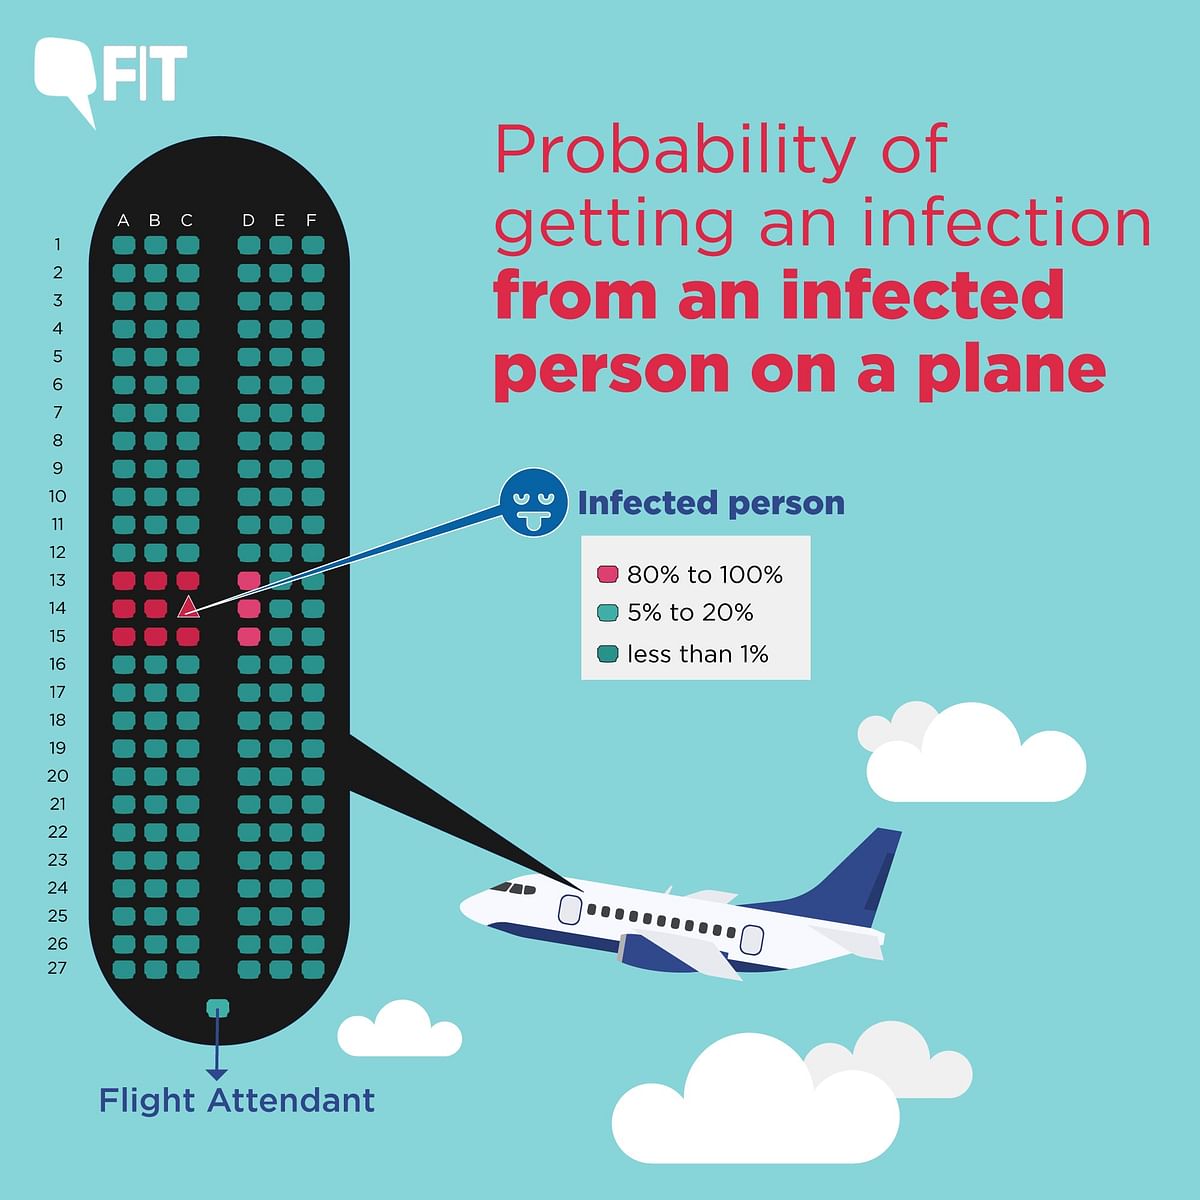 Coronavirus: What are the Chances One Gets Infected in a Plane?